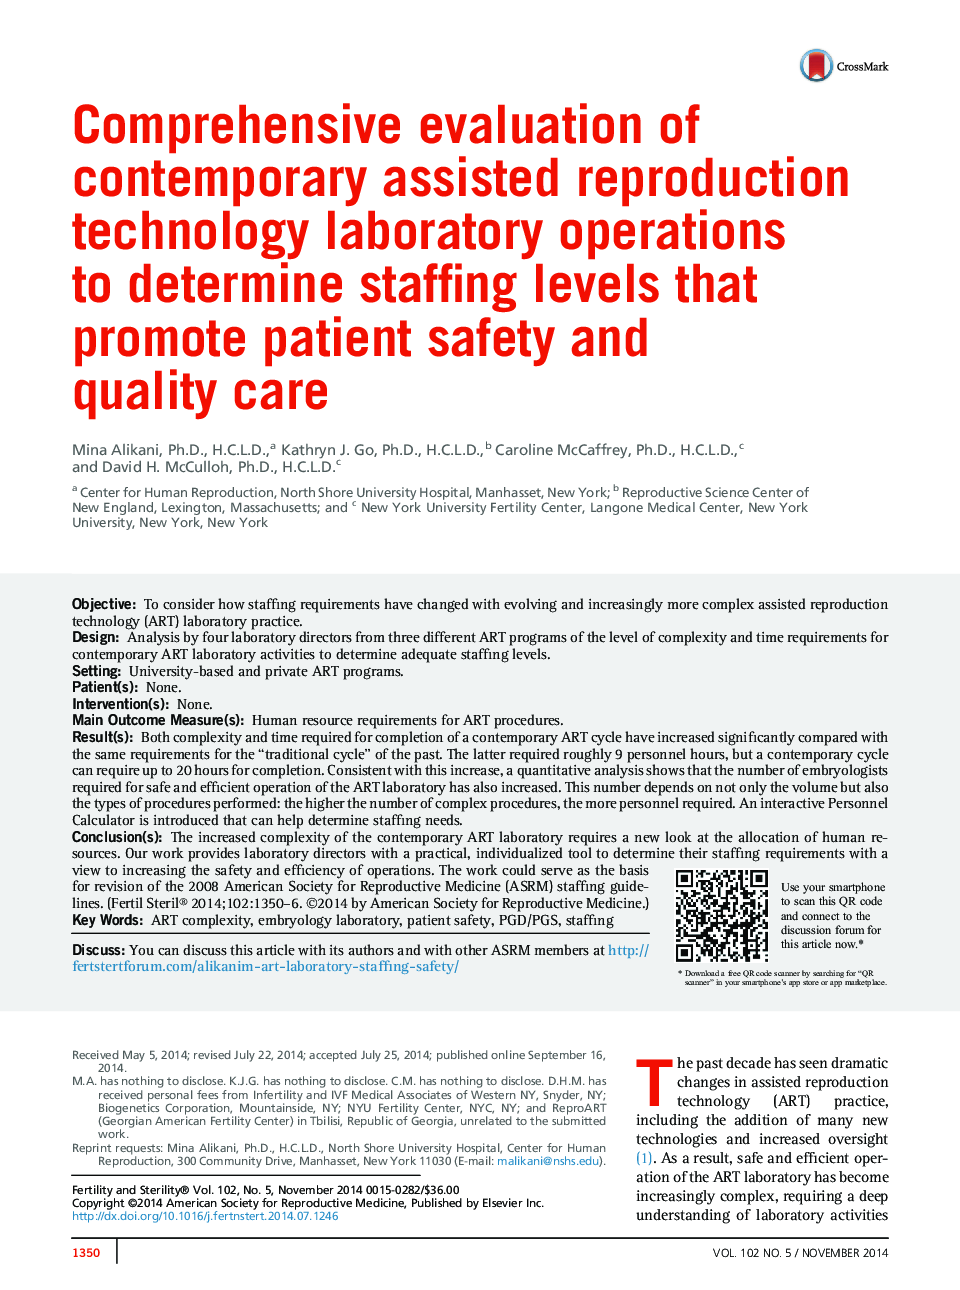 Comprehensive evaluation of contemporary assisted reproduction technology laboratory operations toÂ determine staffing levels that promote patient safety and quality care